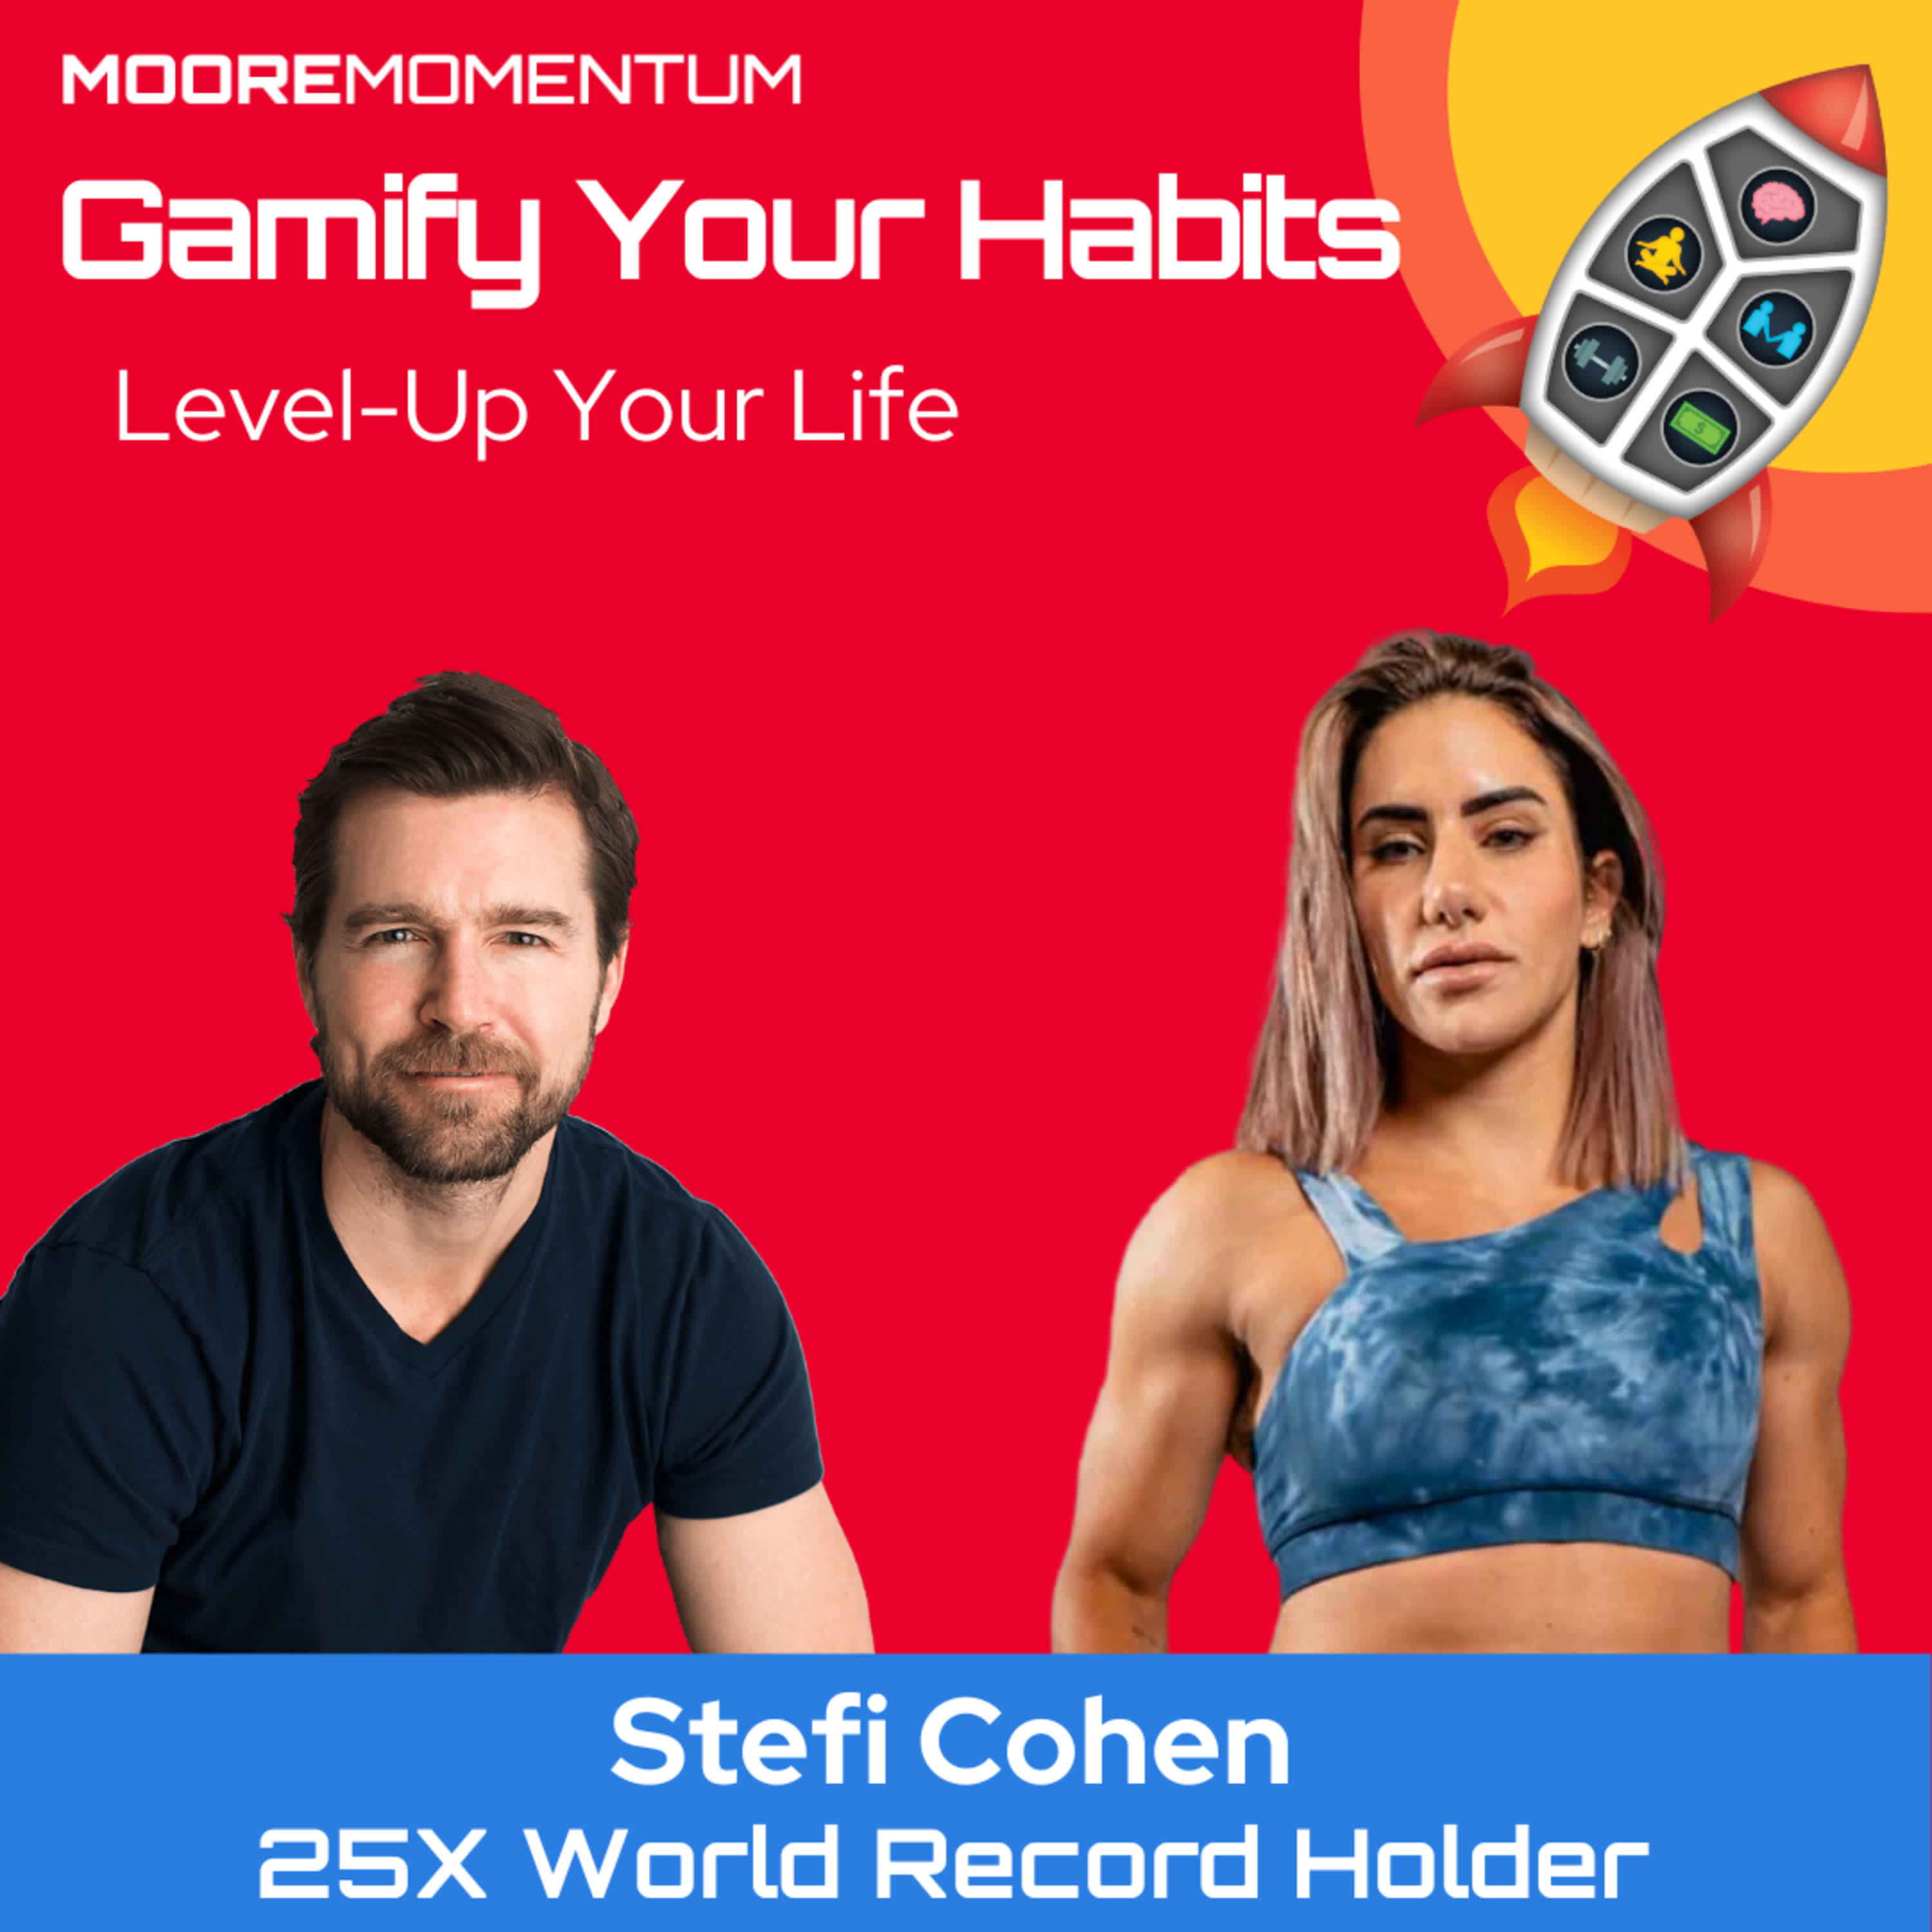 In Turning Your Passion into a Profitable Business, host Will Moore sits down with Stefi Cohen, 25x World Record holder to discuss the mistakes every entrepreneur should avoid.